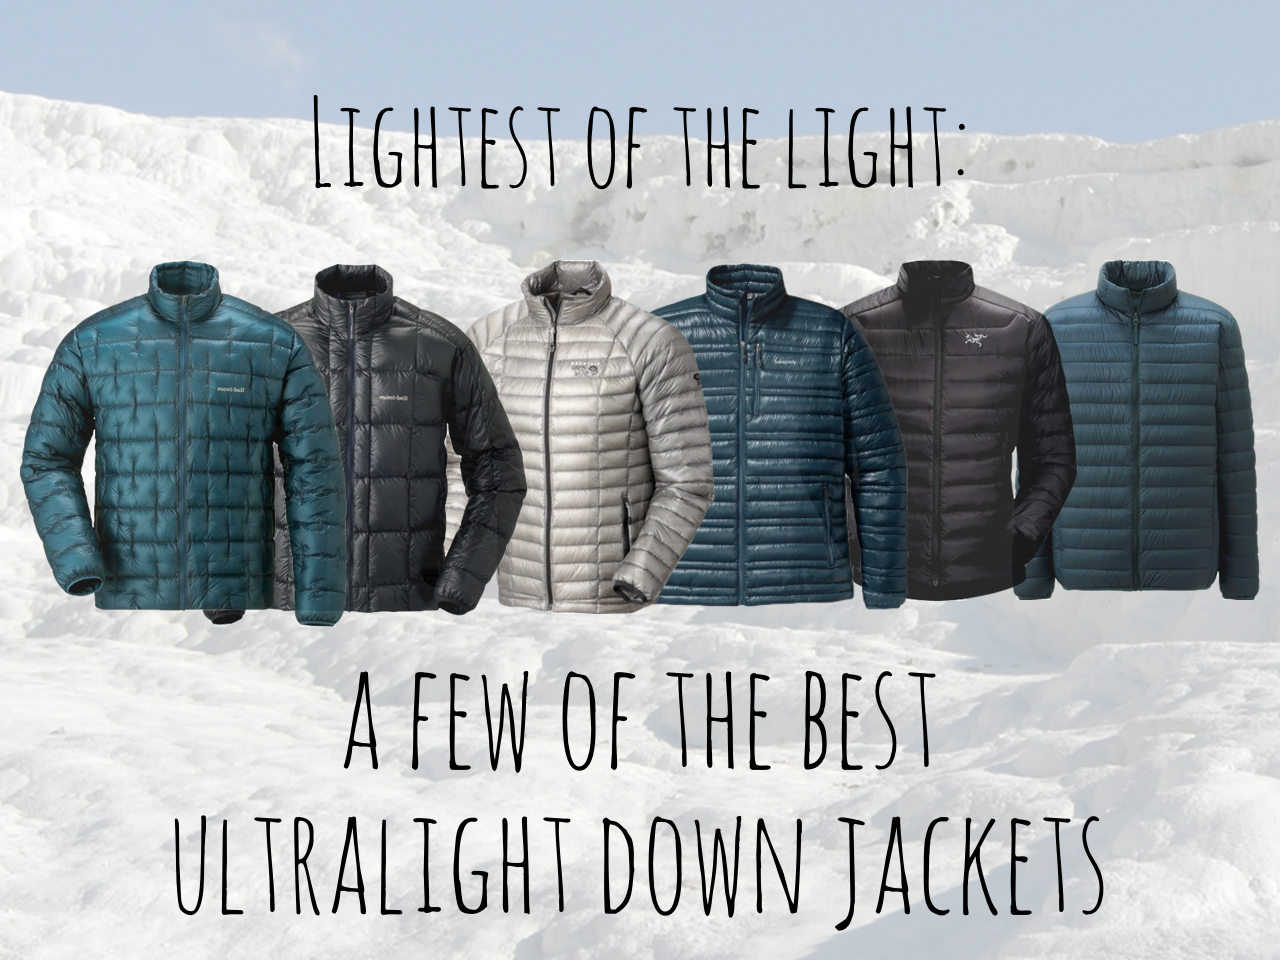 Best Columbia Jacket For Winter On Rent (-16 Degree Ultra Light)